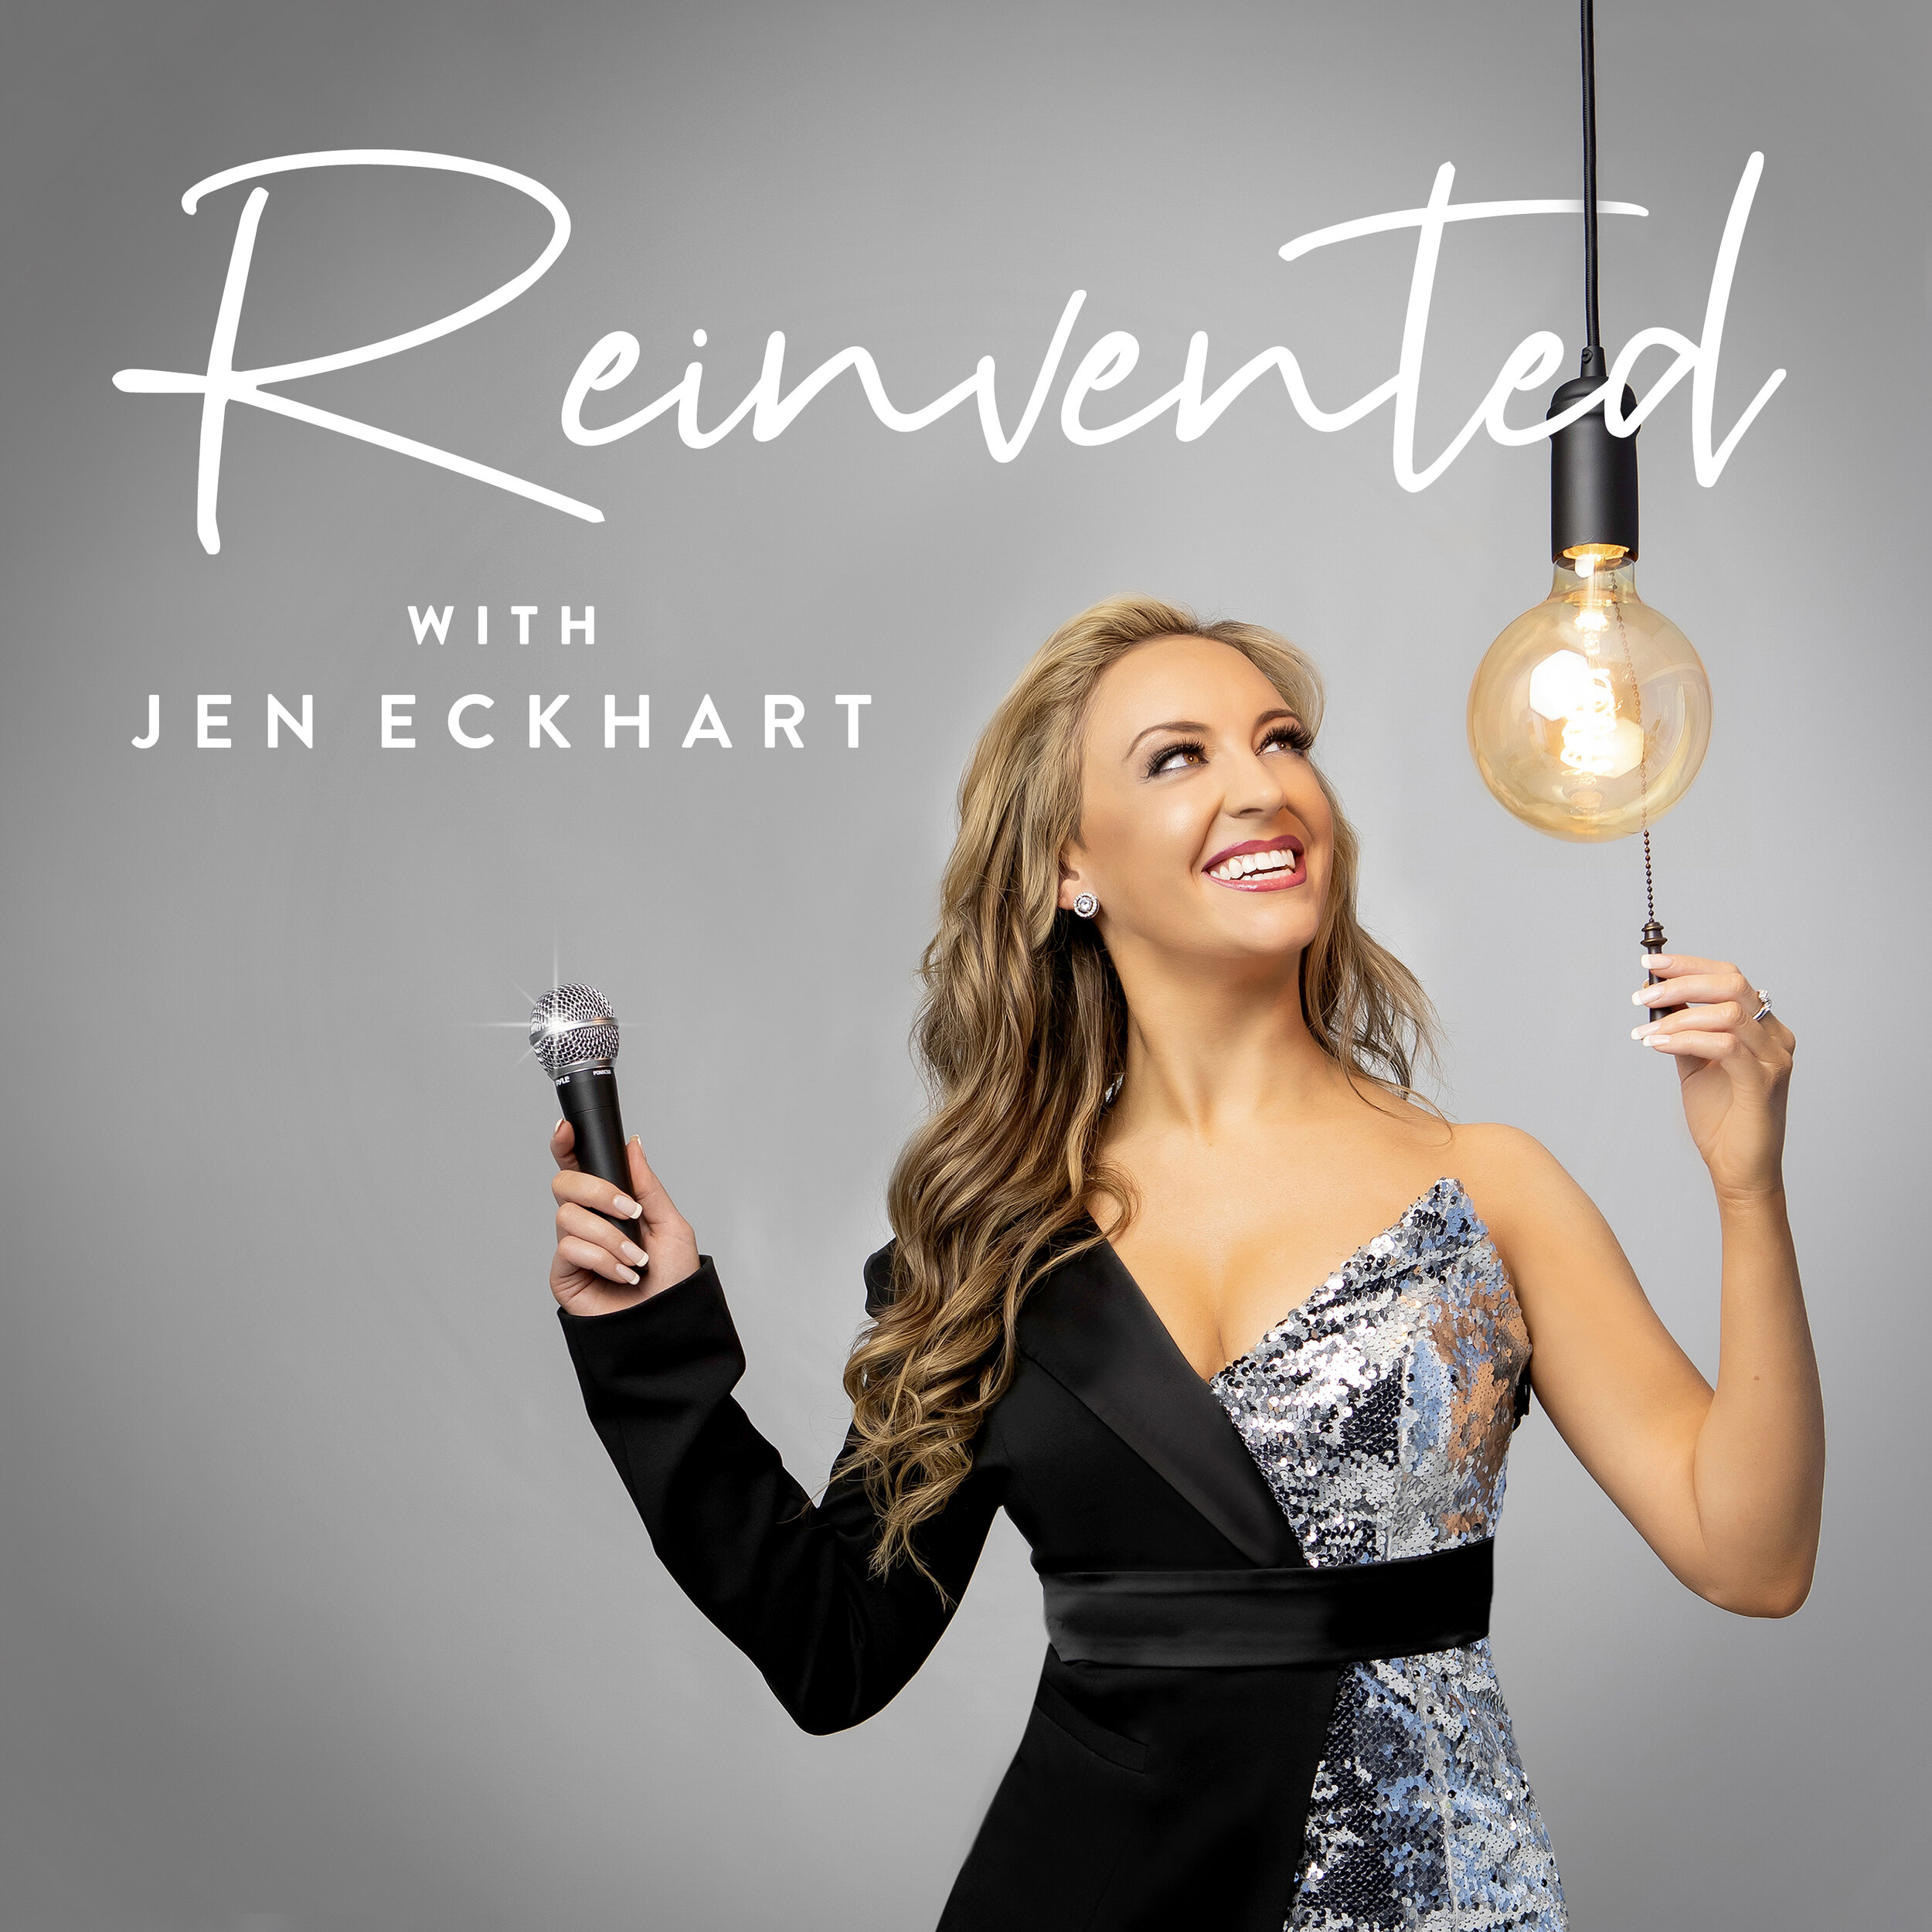 New Podcast ‘REINVENTED with Jen Eckhart’ Now Available on All Major Streaming Platforms - Series to Feature In-Depth Interviews with All-Star Line-Up of Guests, Including Sean Paul, Kathy Ireland, Brian Cuban, Melissa Rivers, Gretchen Carlson & More.To read the official press release, click HERE.